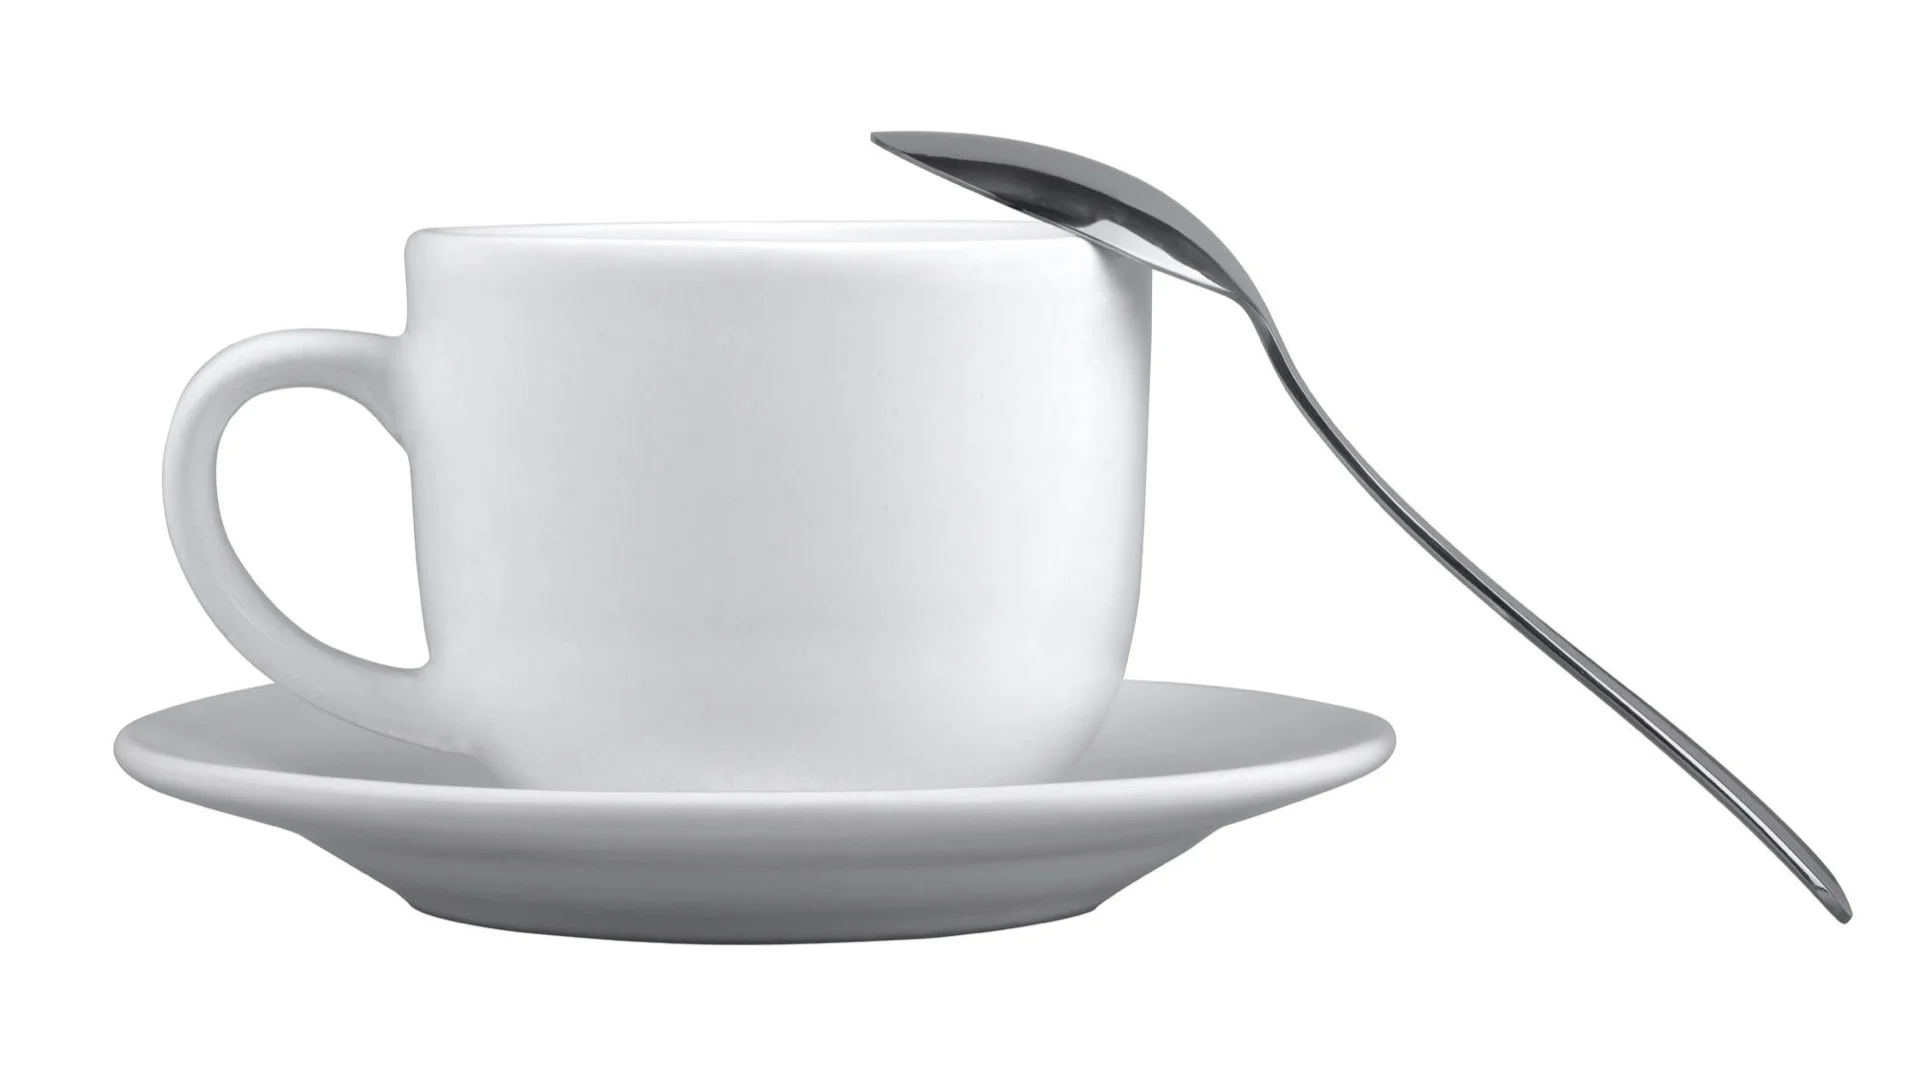 How many teaspoons are in a half a cup? Conversion Guide